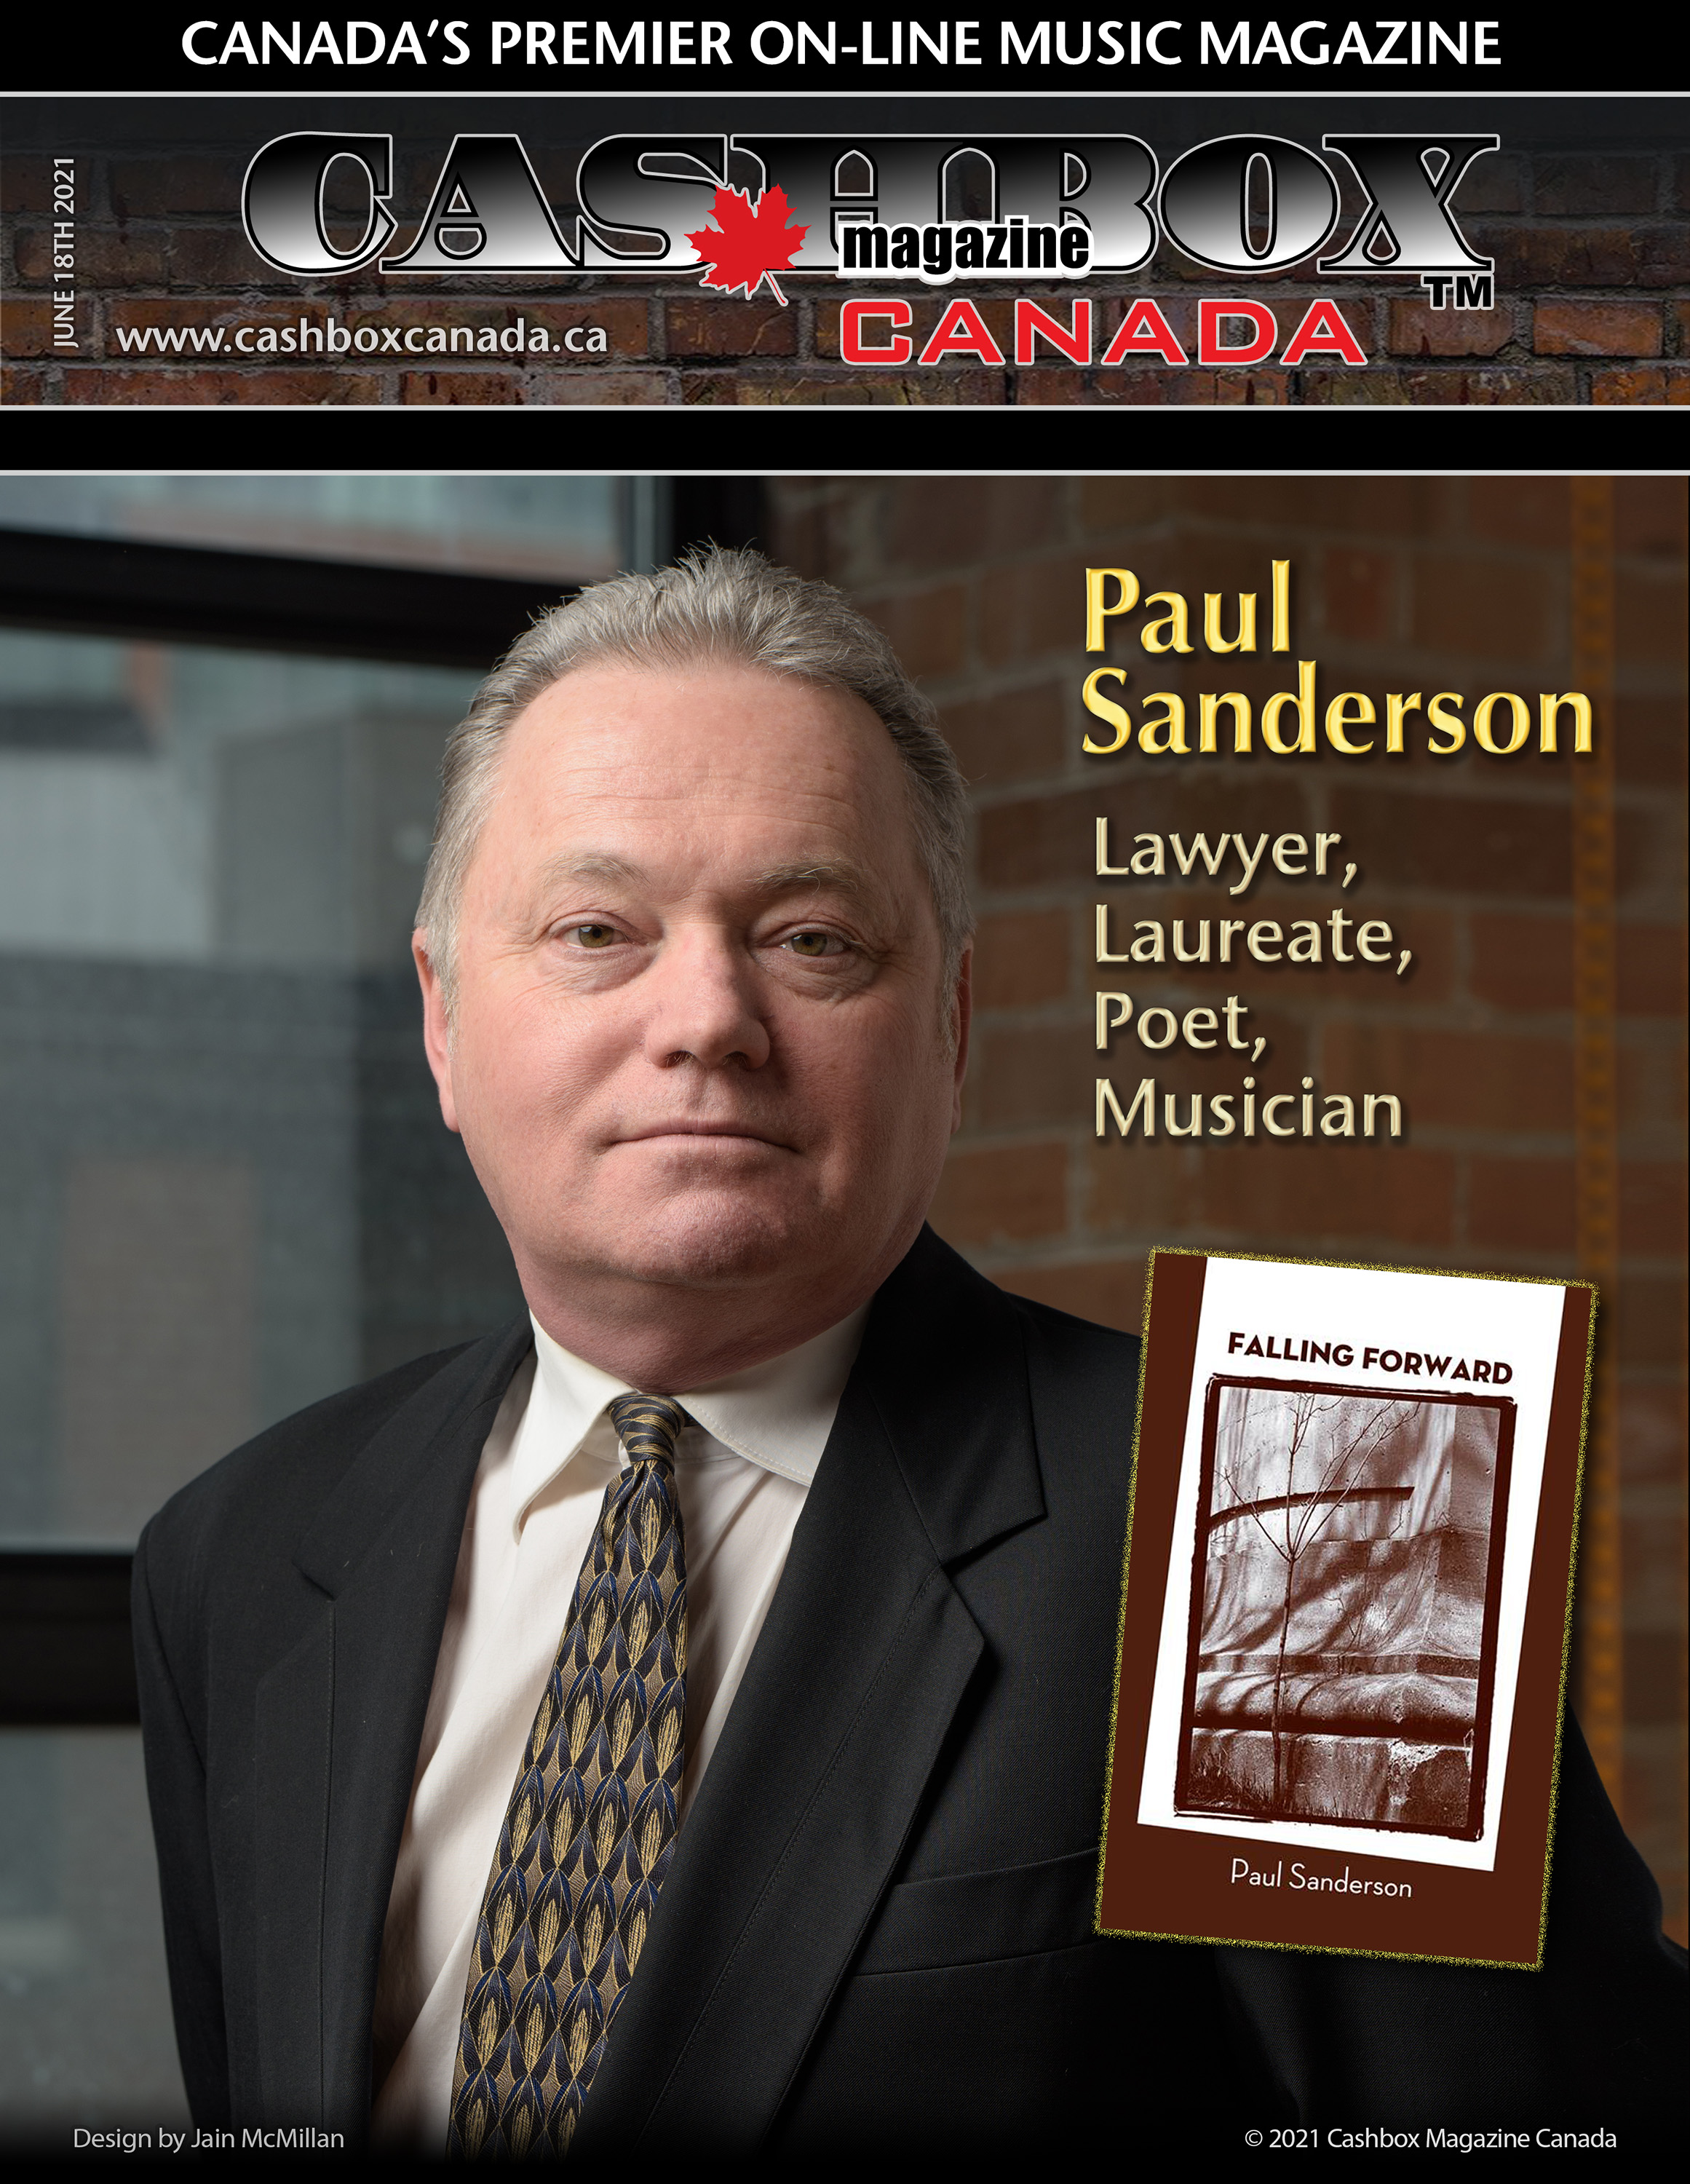 Paul Sanderson - A Lawyer, A Laureate, A Poet and a Musician